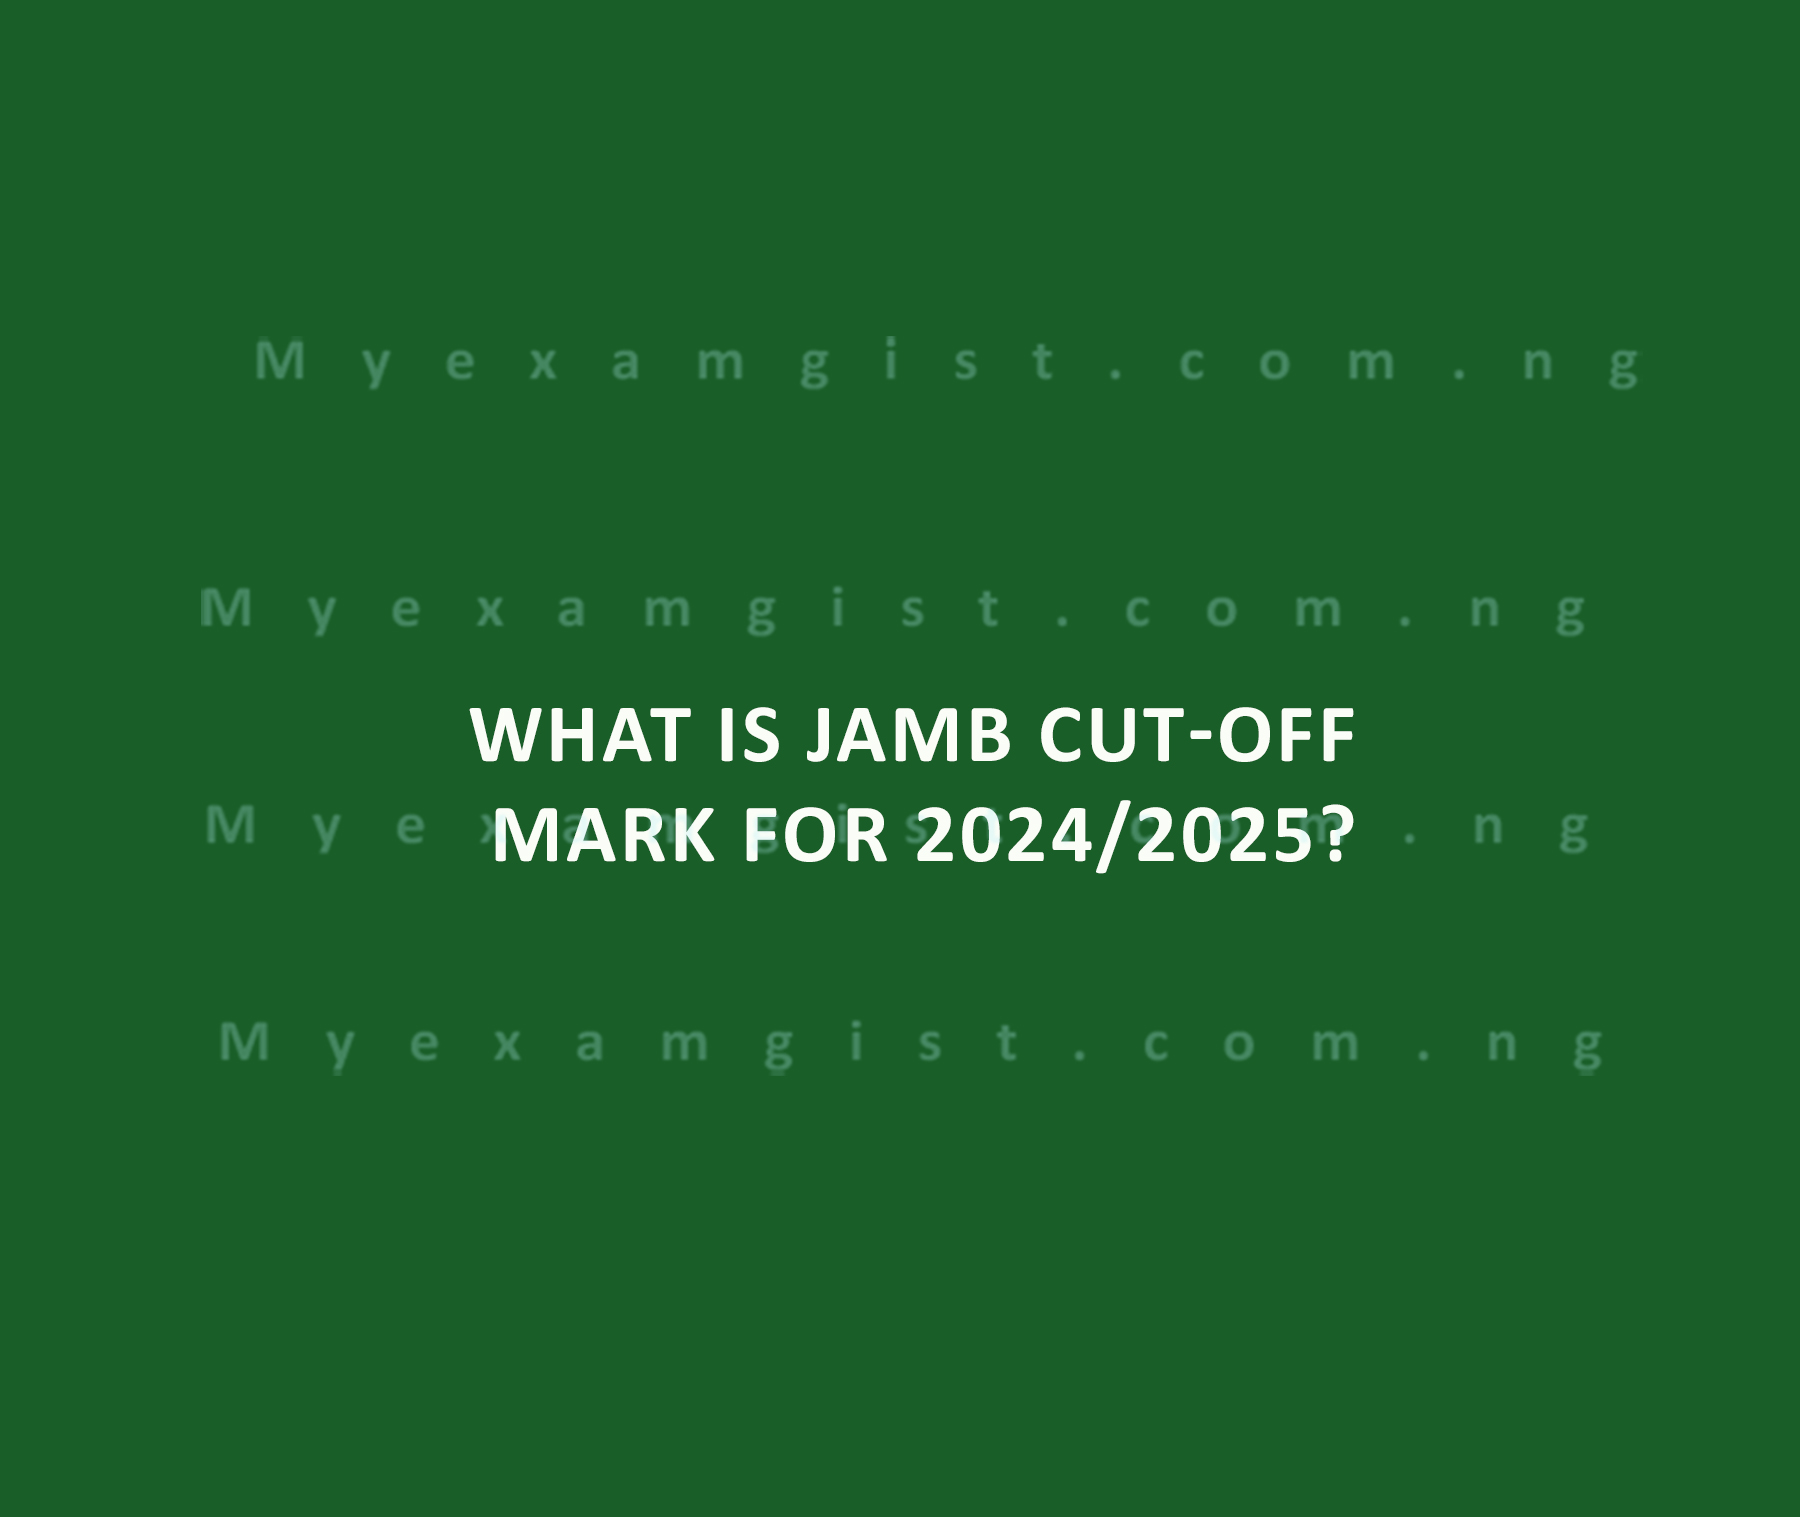 What is JAMB Cut-off Mark for 2024/2025?